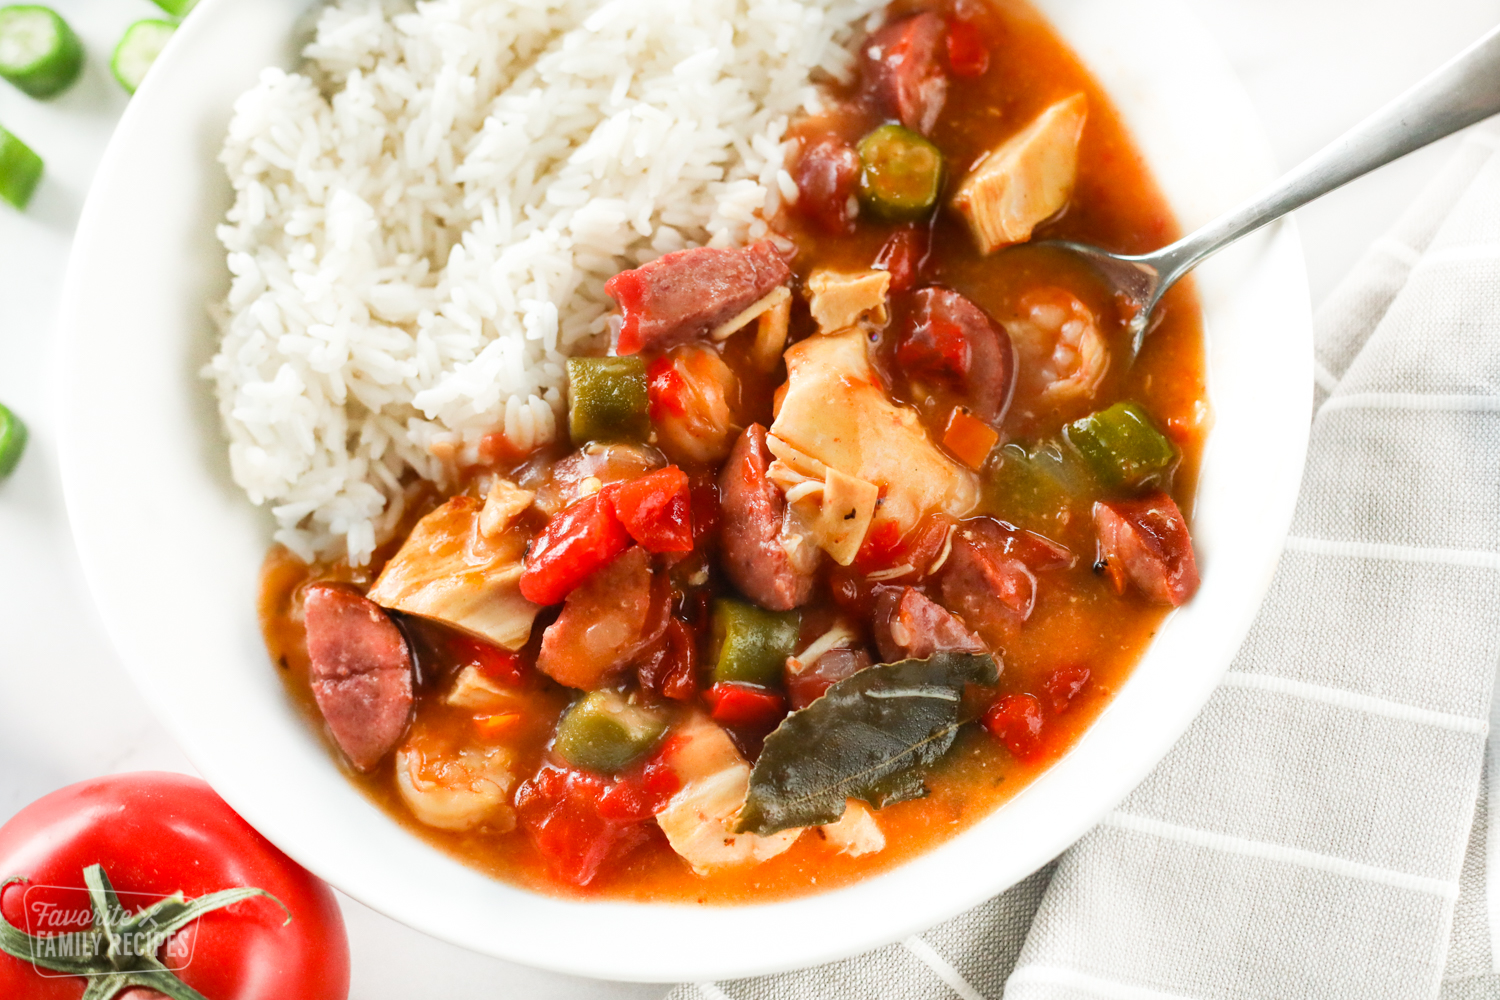 A bowl of Instant Pot gumbo made with chicken, sausage, shrimp, peppers, onions, okra, and seasonings with rice served on the side.